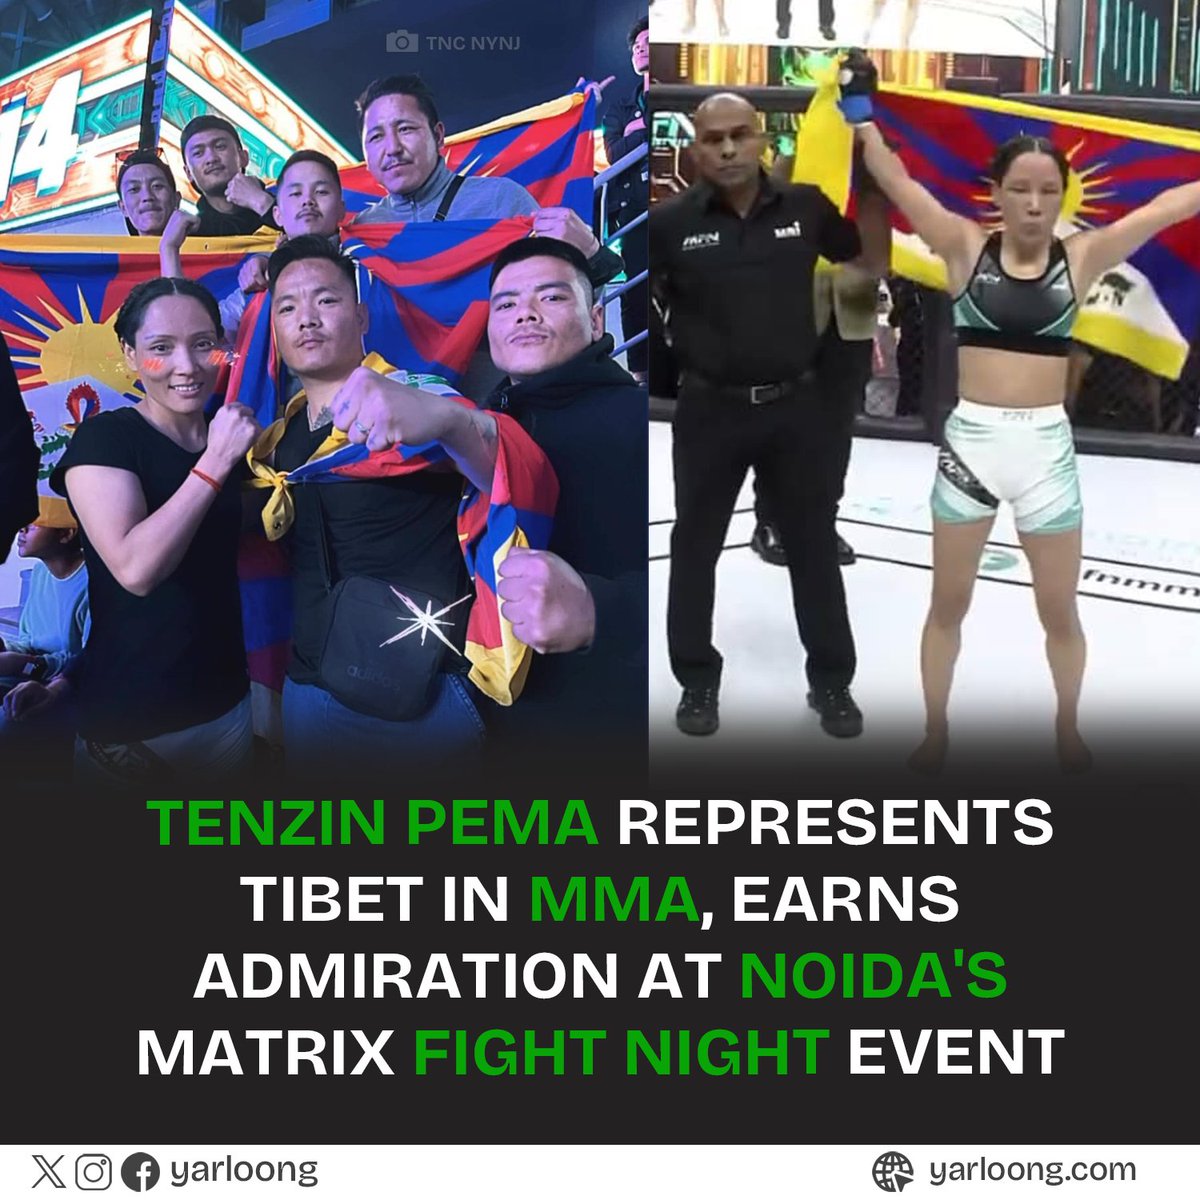 Although Tenzin didn't claim victory, her performance earned her widespread admiration and support, particularly from the #Tibetan community who enthusiastically cheered her on from the stands, leaving a lasting impression on the MFN platform and its audience. #MMAIndia